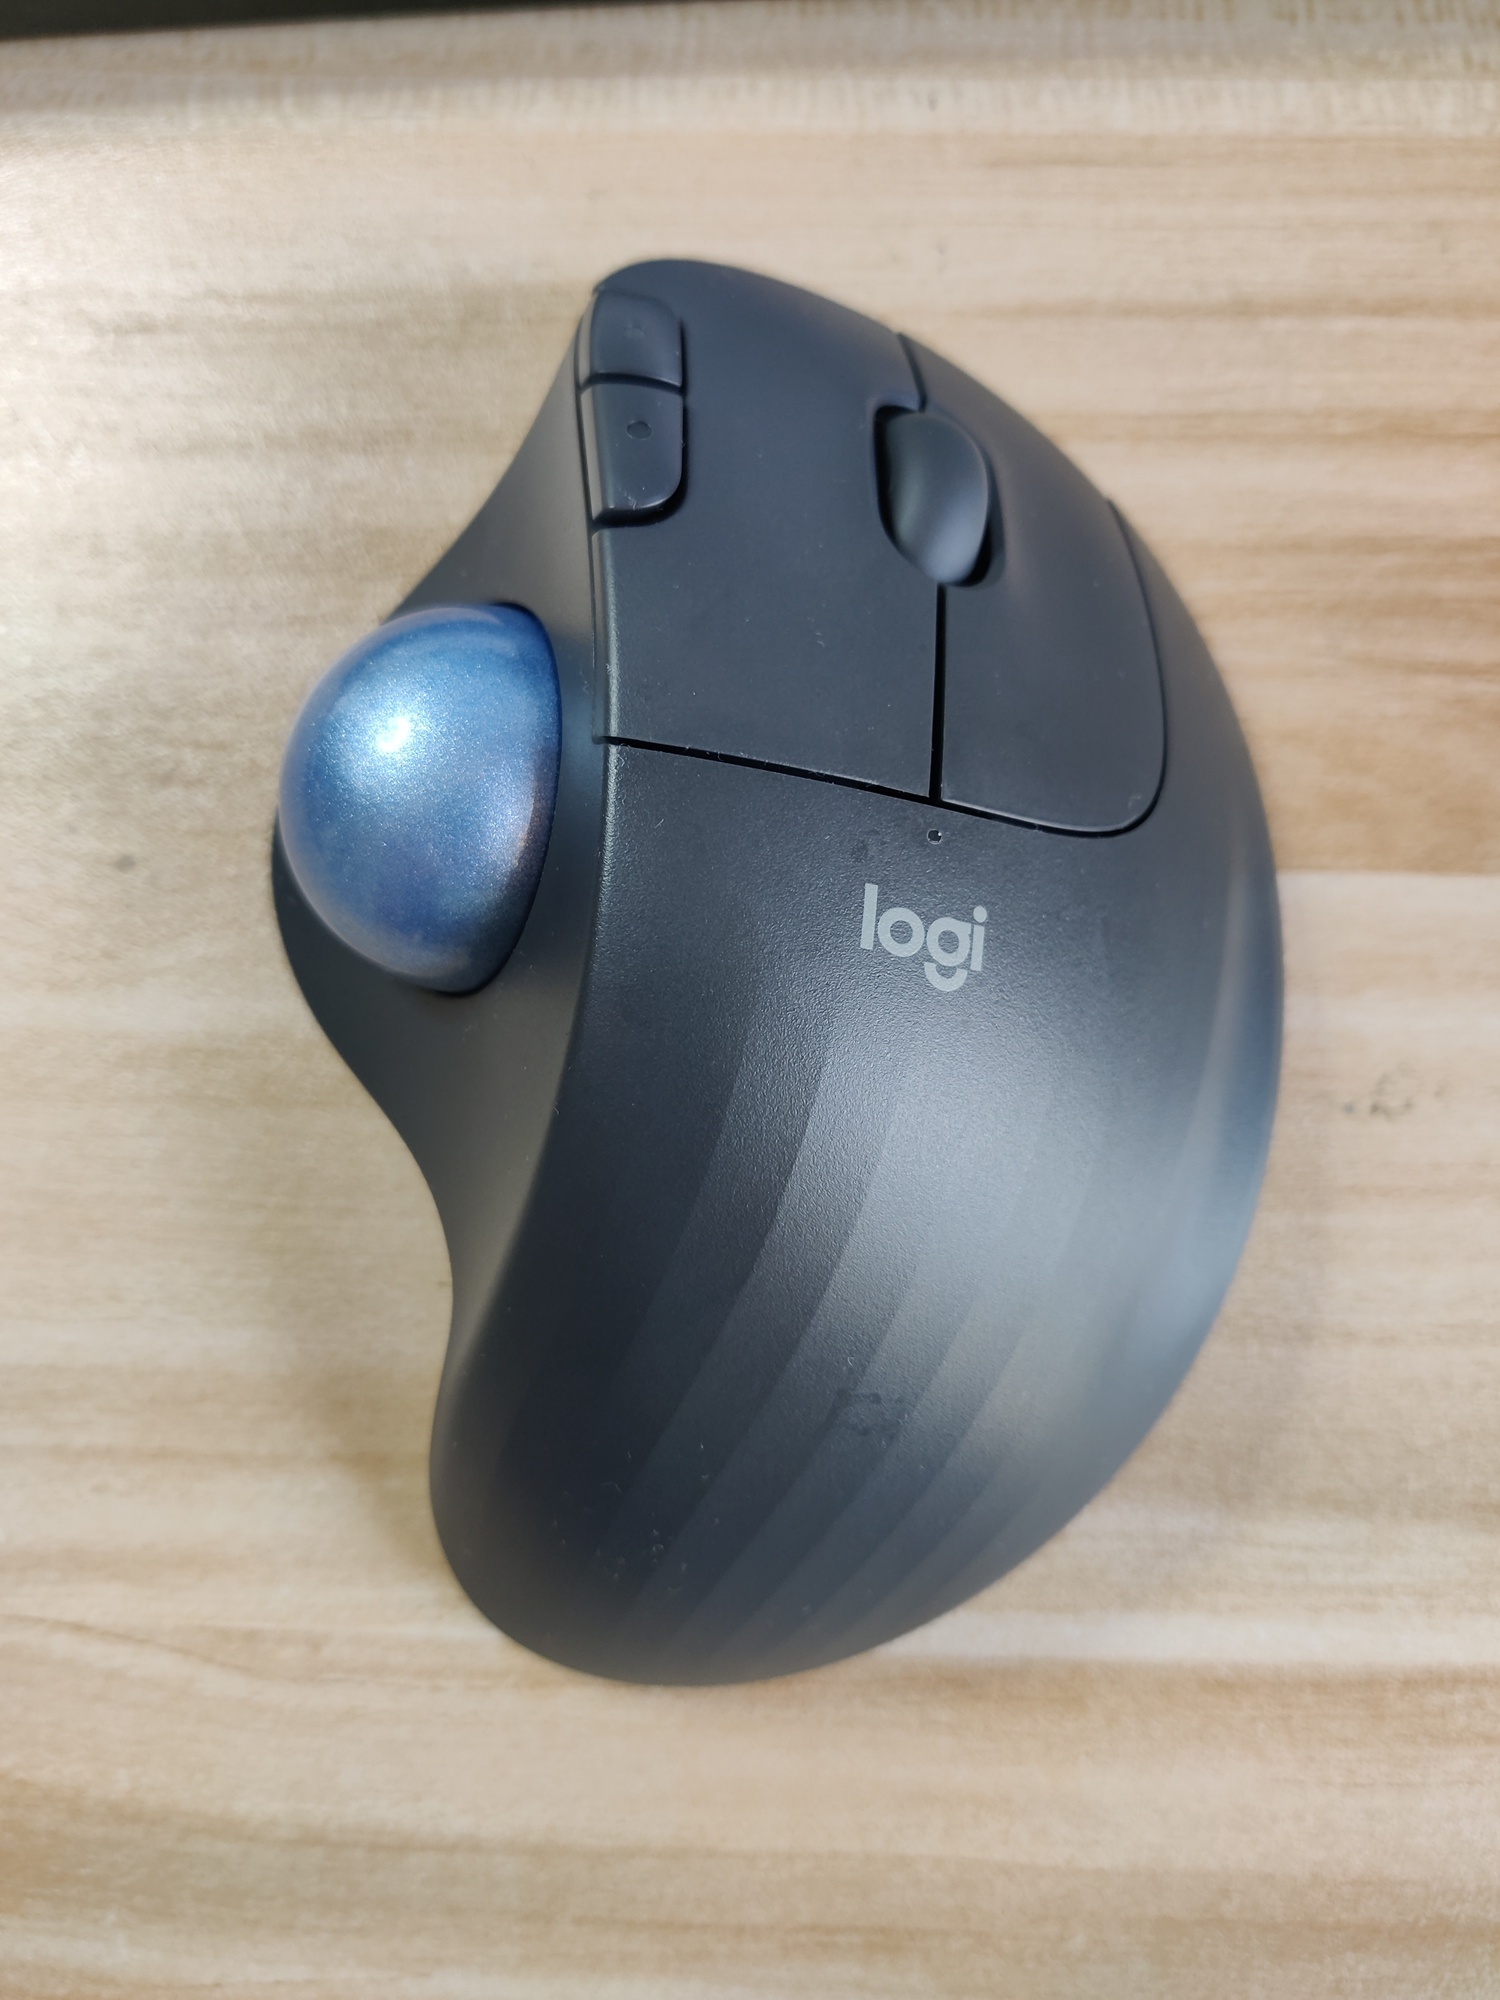 Top view of the trackball. It is asymmetric. A shiny blue trackball (3-4
cm in diameter) is on the left. The chassis on the right is made of black
plastic, has a "logi" logo, and features two mouse buttons and
a scrollwheel. At the tip of the left button there are two protruding
buttons in a vertical layout.